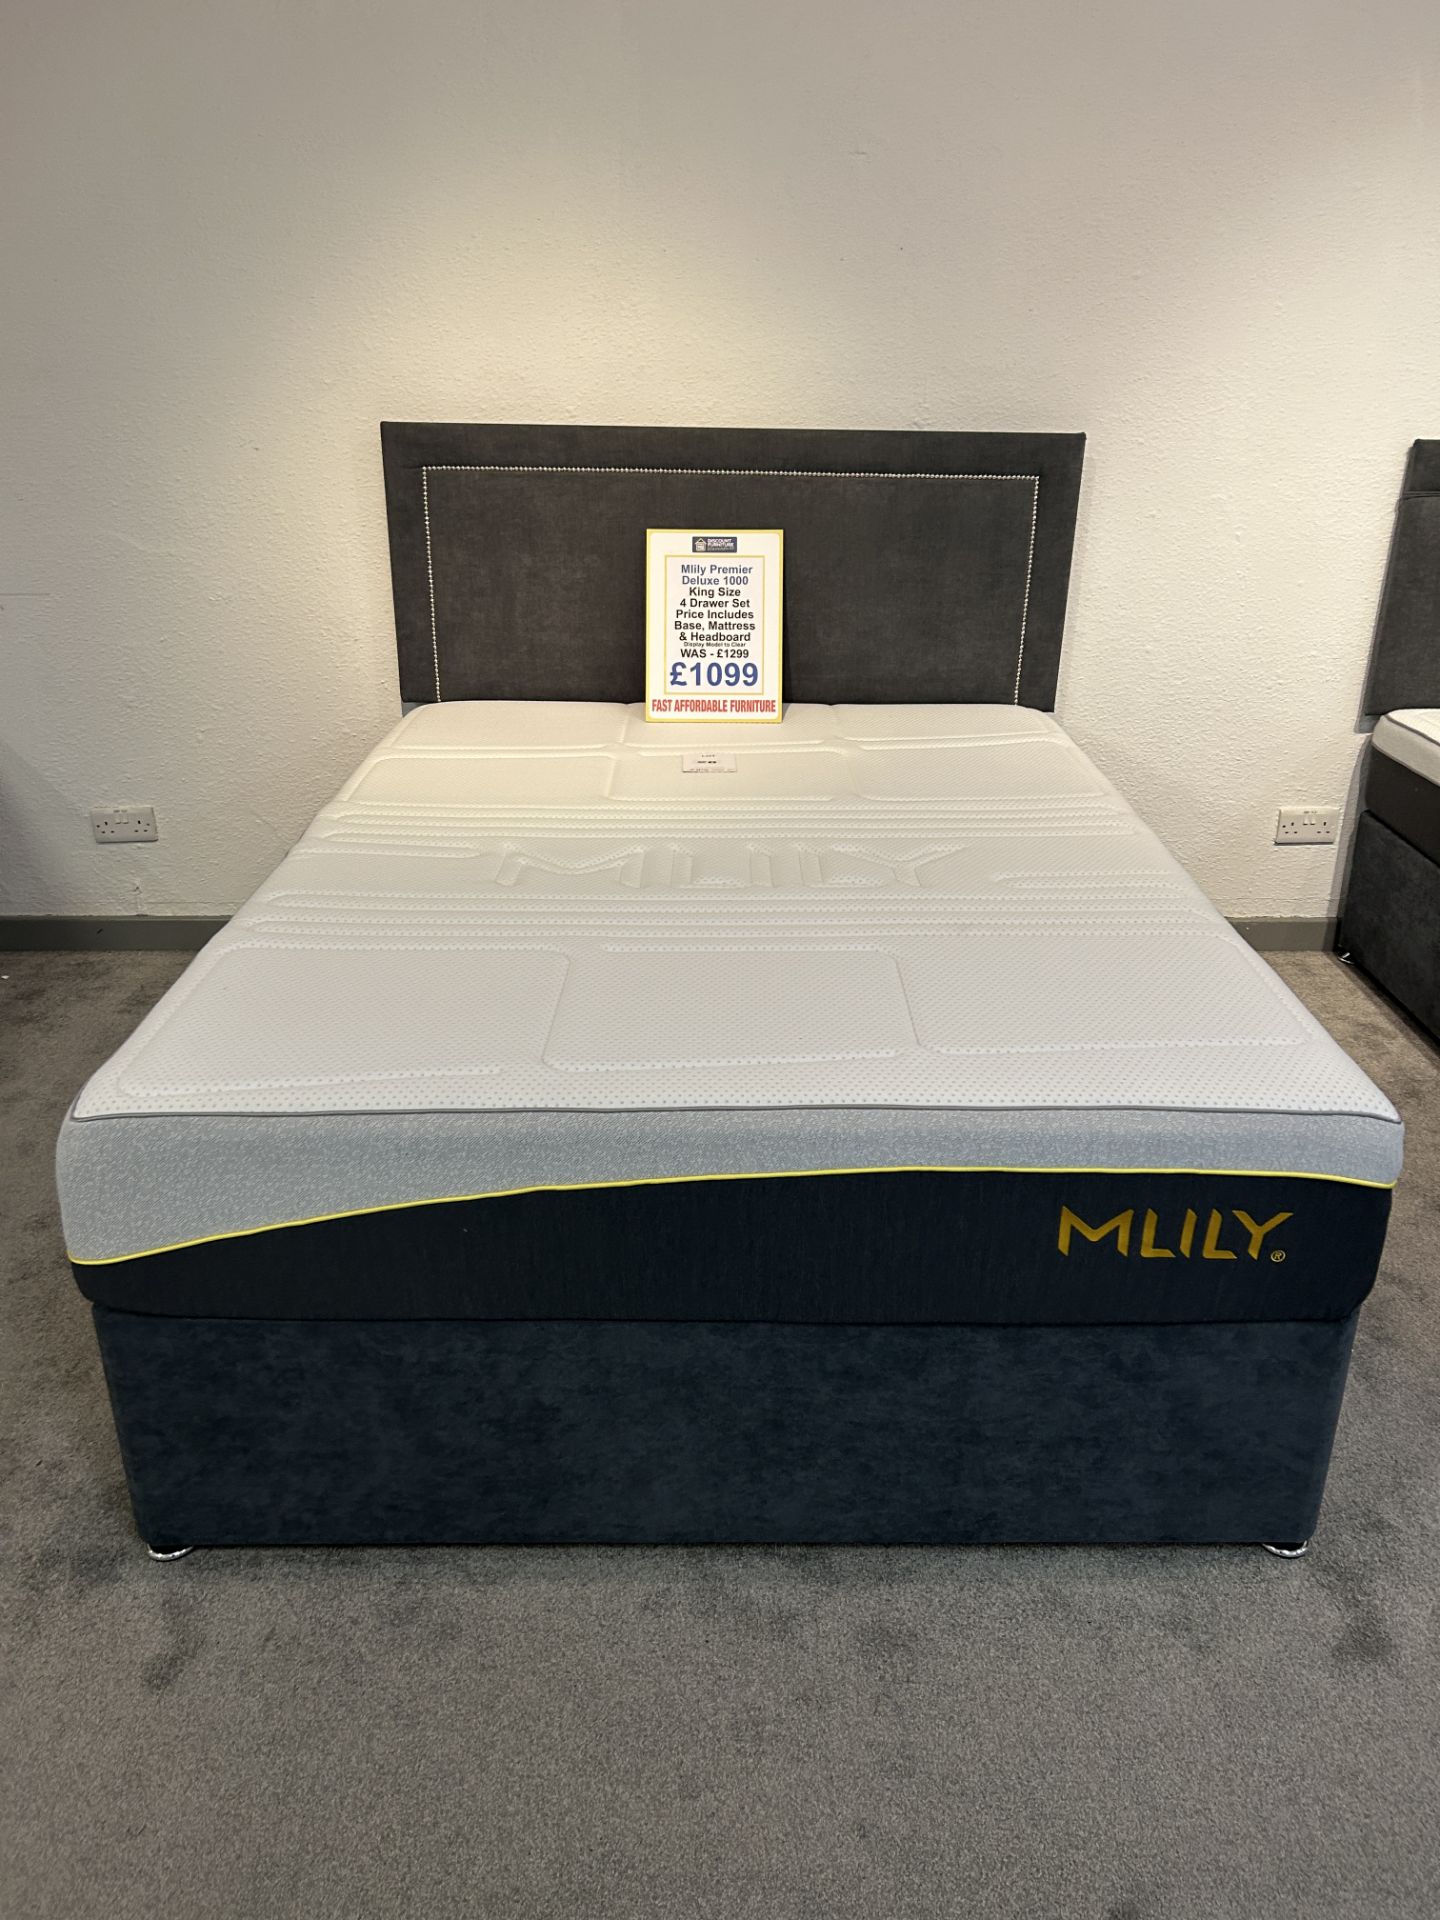 Ex-Display King Size 4 Drawer Bed Set incl: MLily Deluxe 1000 Mattress, Base & Headboard | RRP £1,29